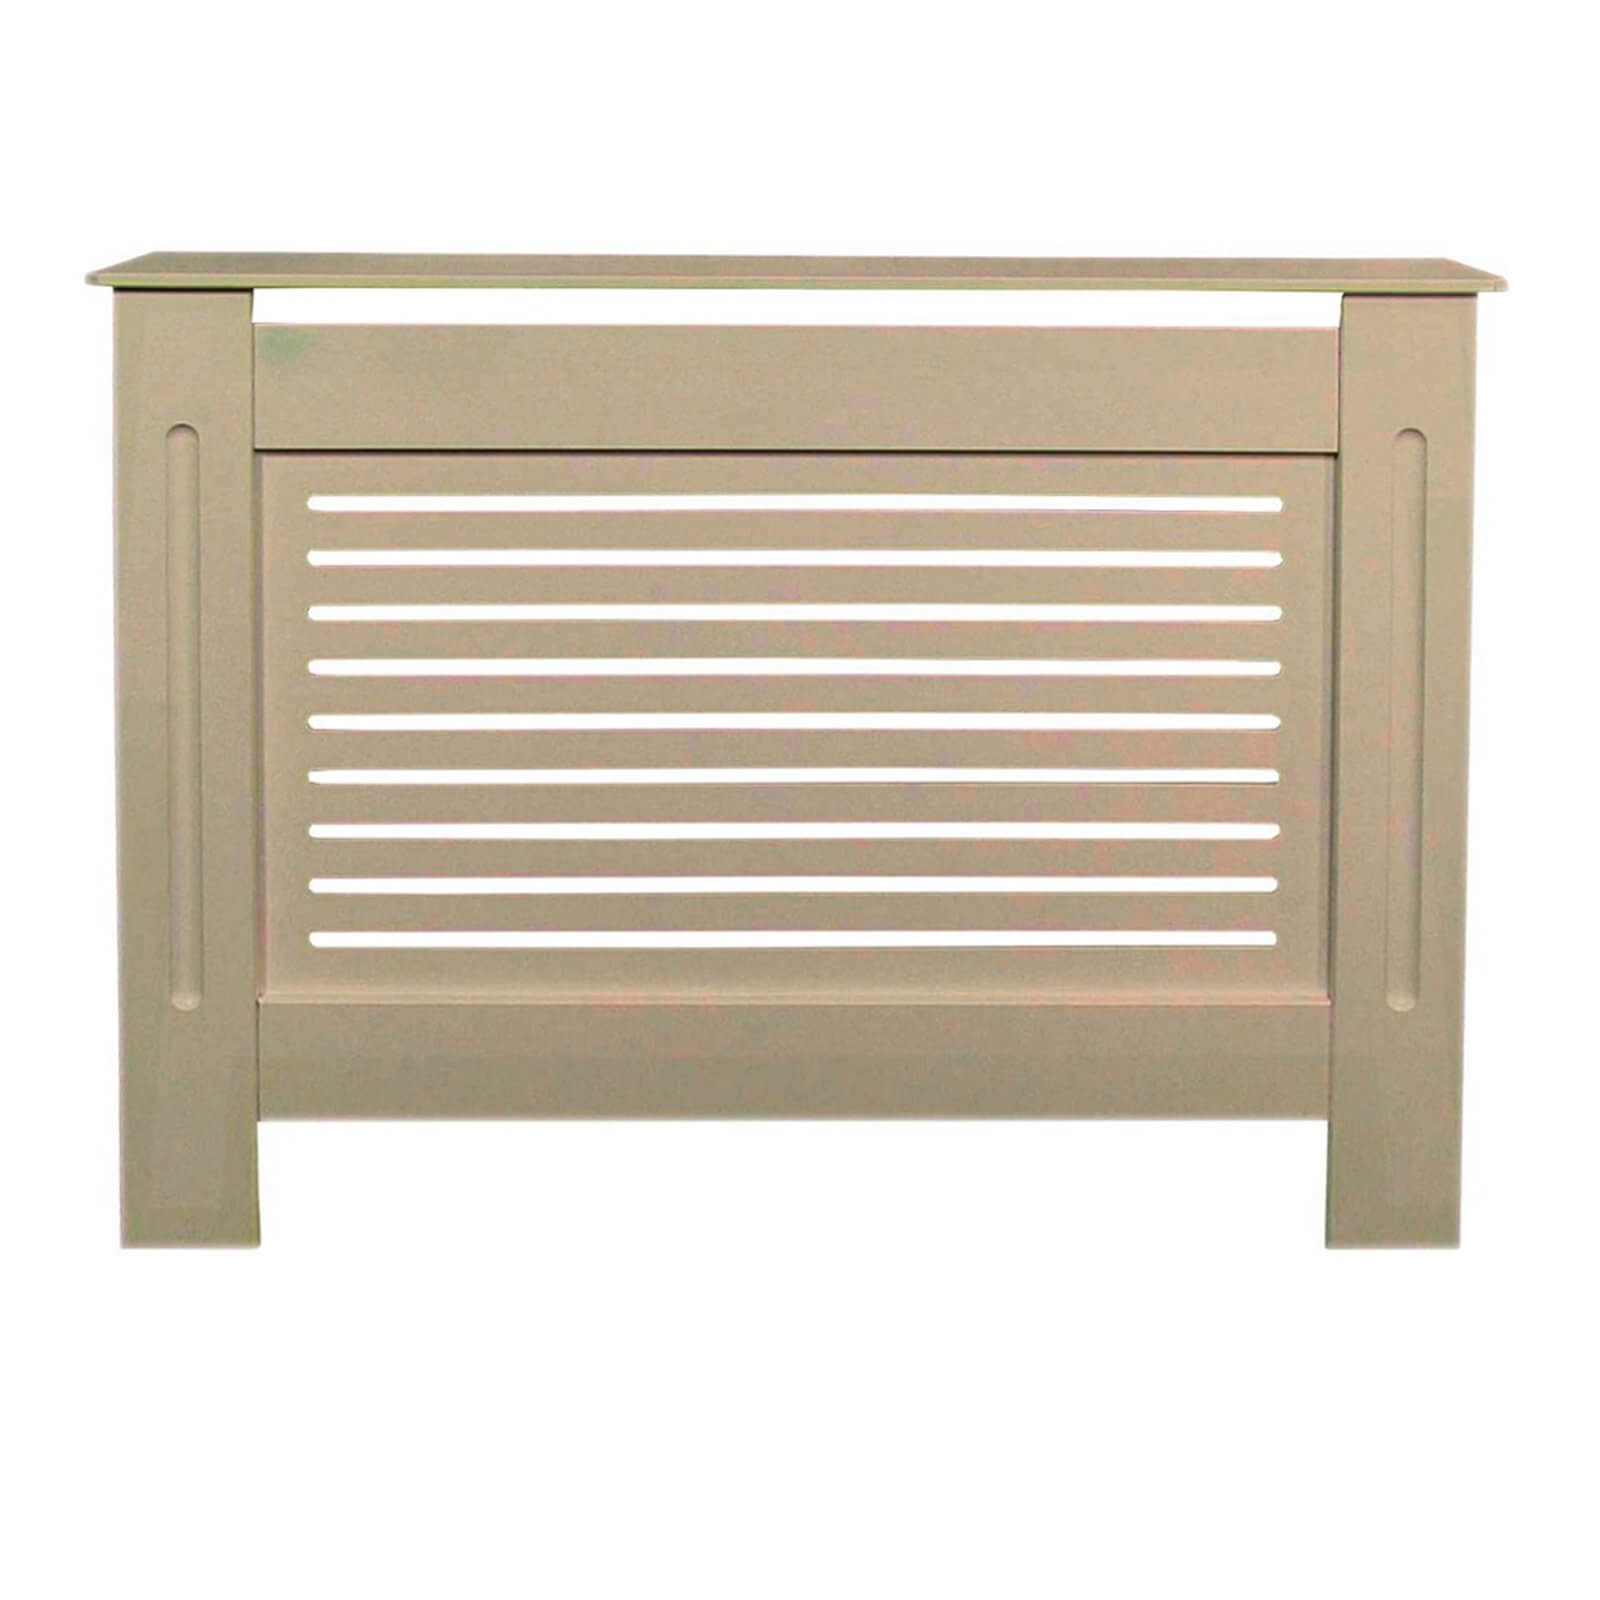 Radiator Cover with Horizontal Slatted Design in Unpainted - Small